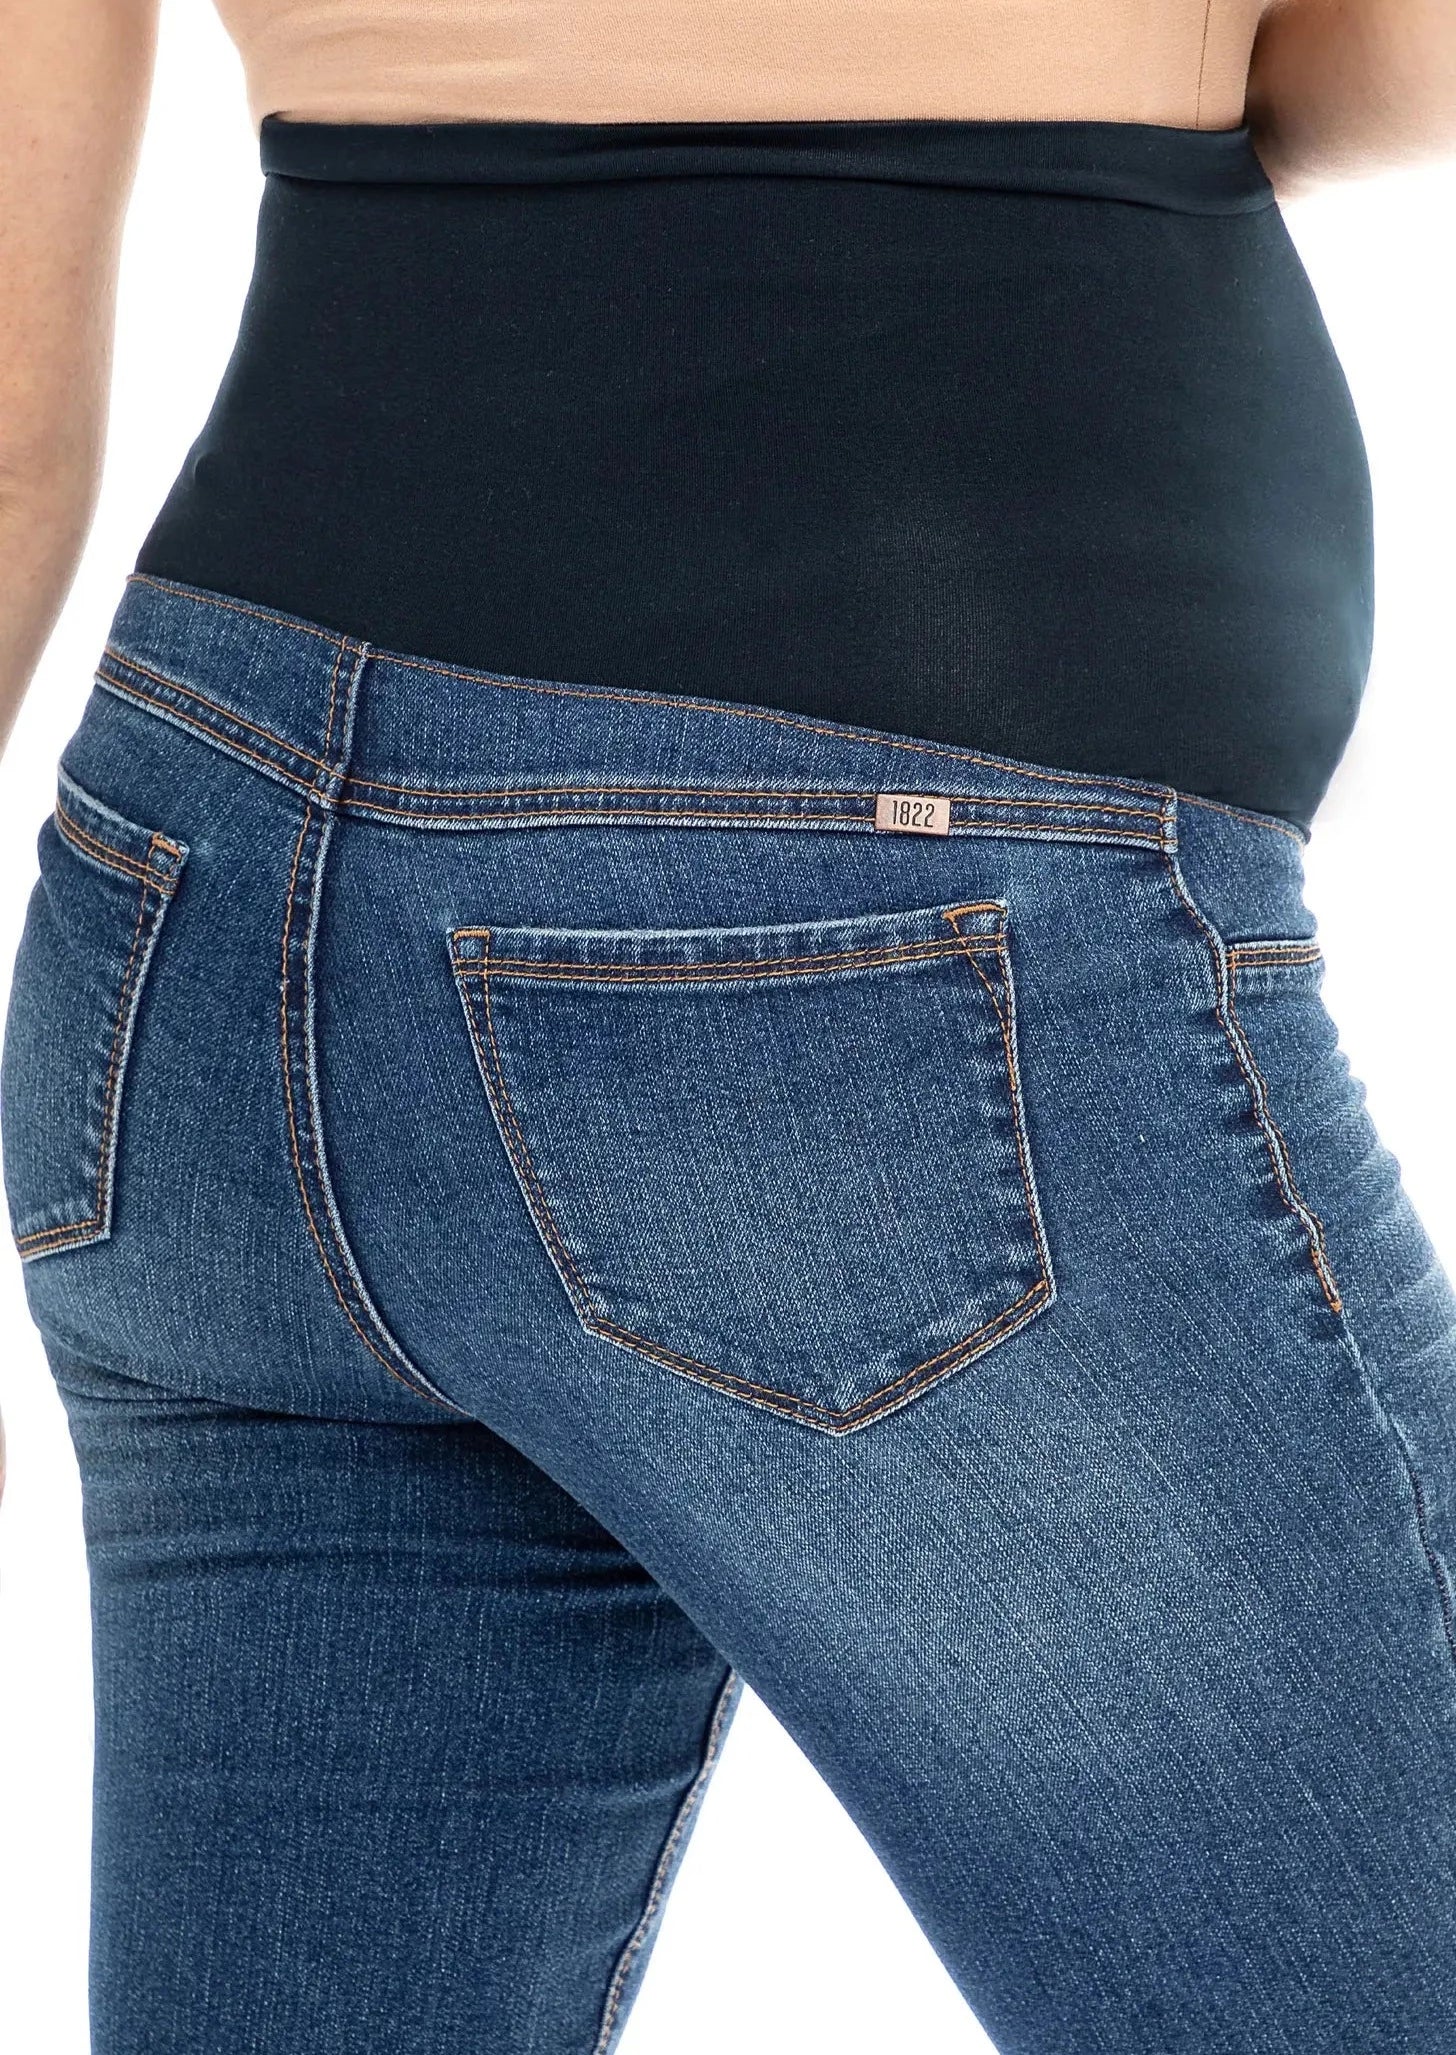 Petite maternity jeans. Petite maternity clothes by MARION, over belly bump support. Sustainable designer maternity fashion.